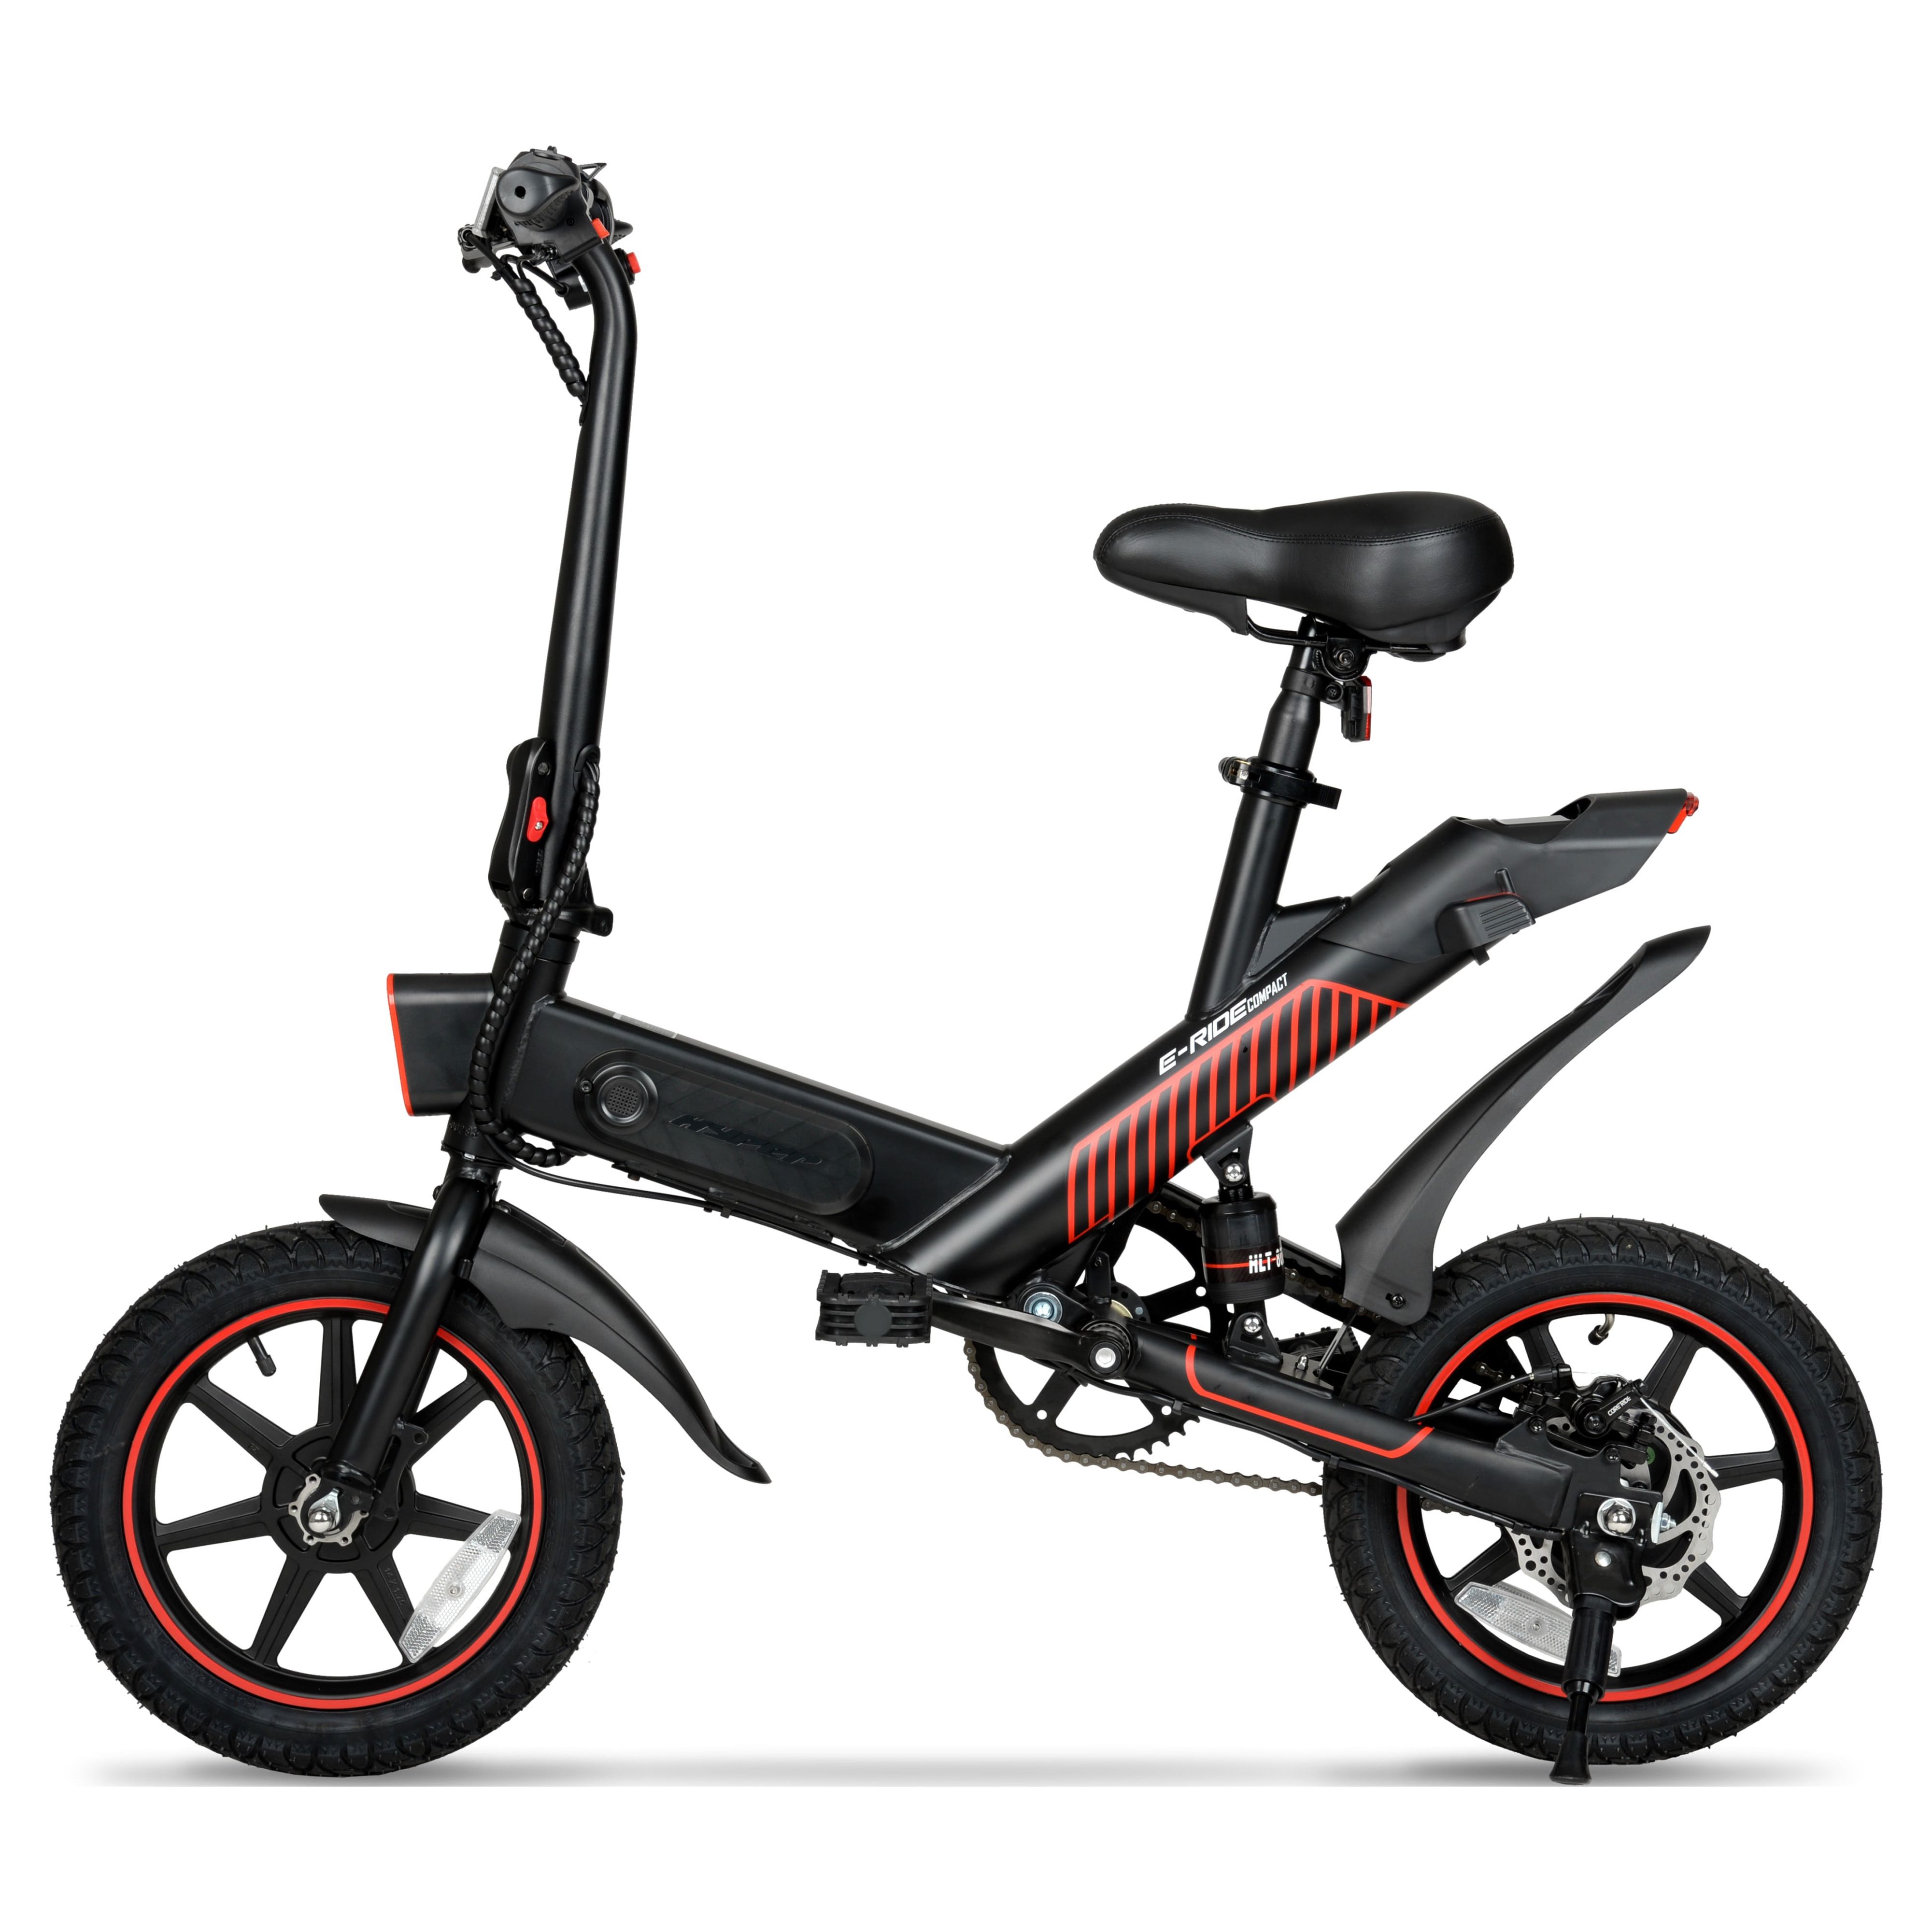 Hyper Bicycles 14" 36V Foldable Compact Electric Bike w/Throttle, 350W Motor, Recommended Ages 14 years and up - image 4 of 20